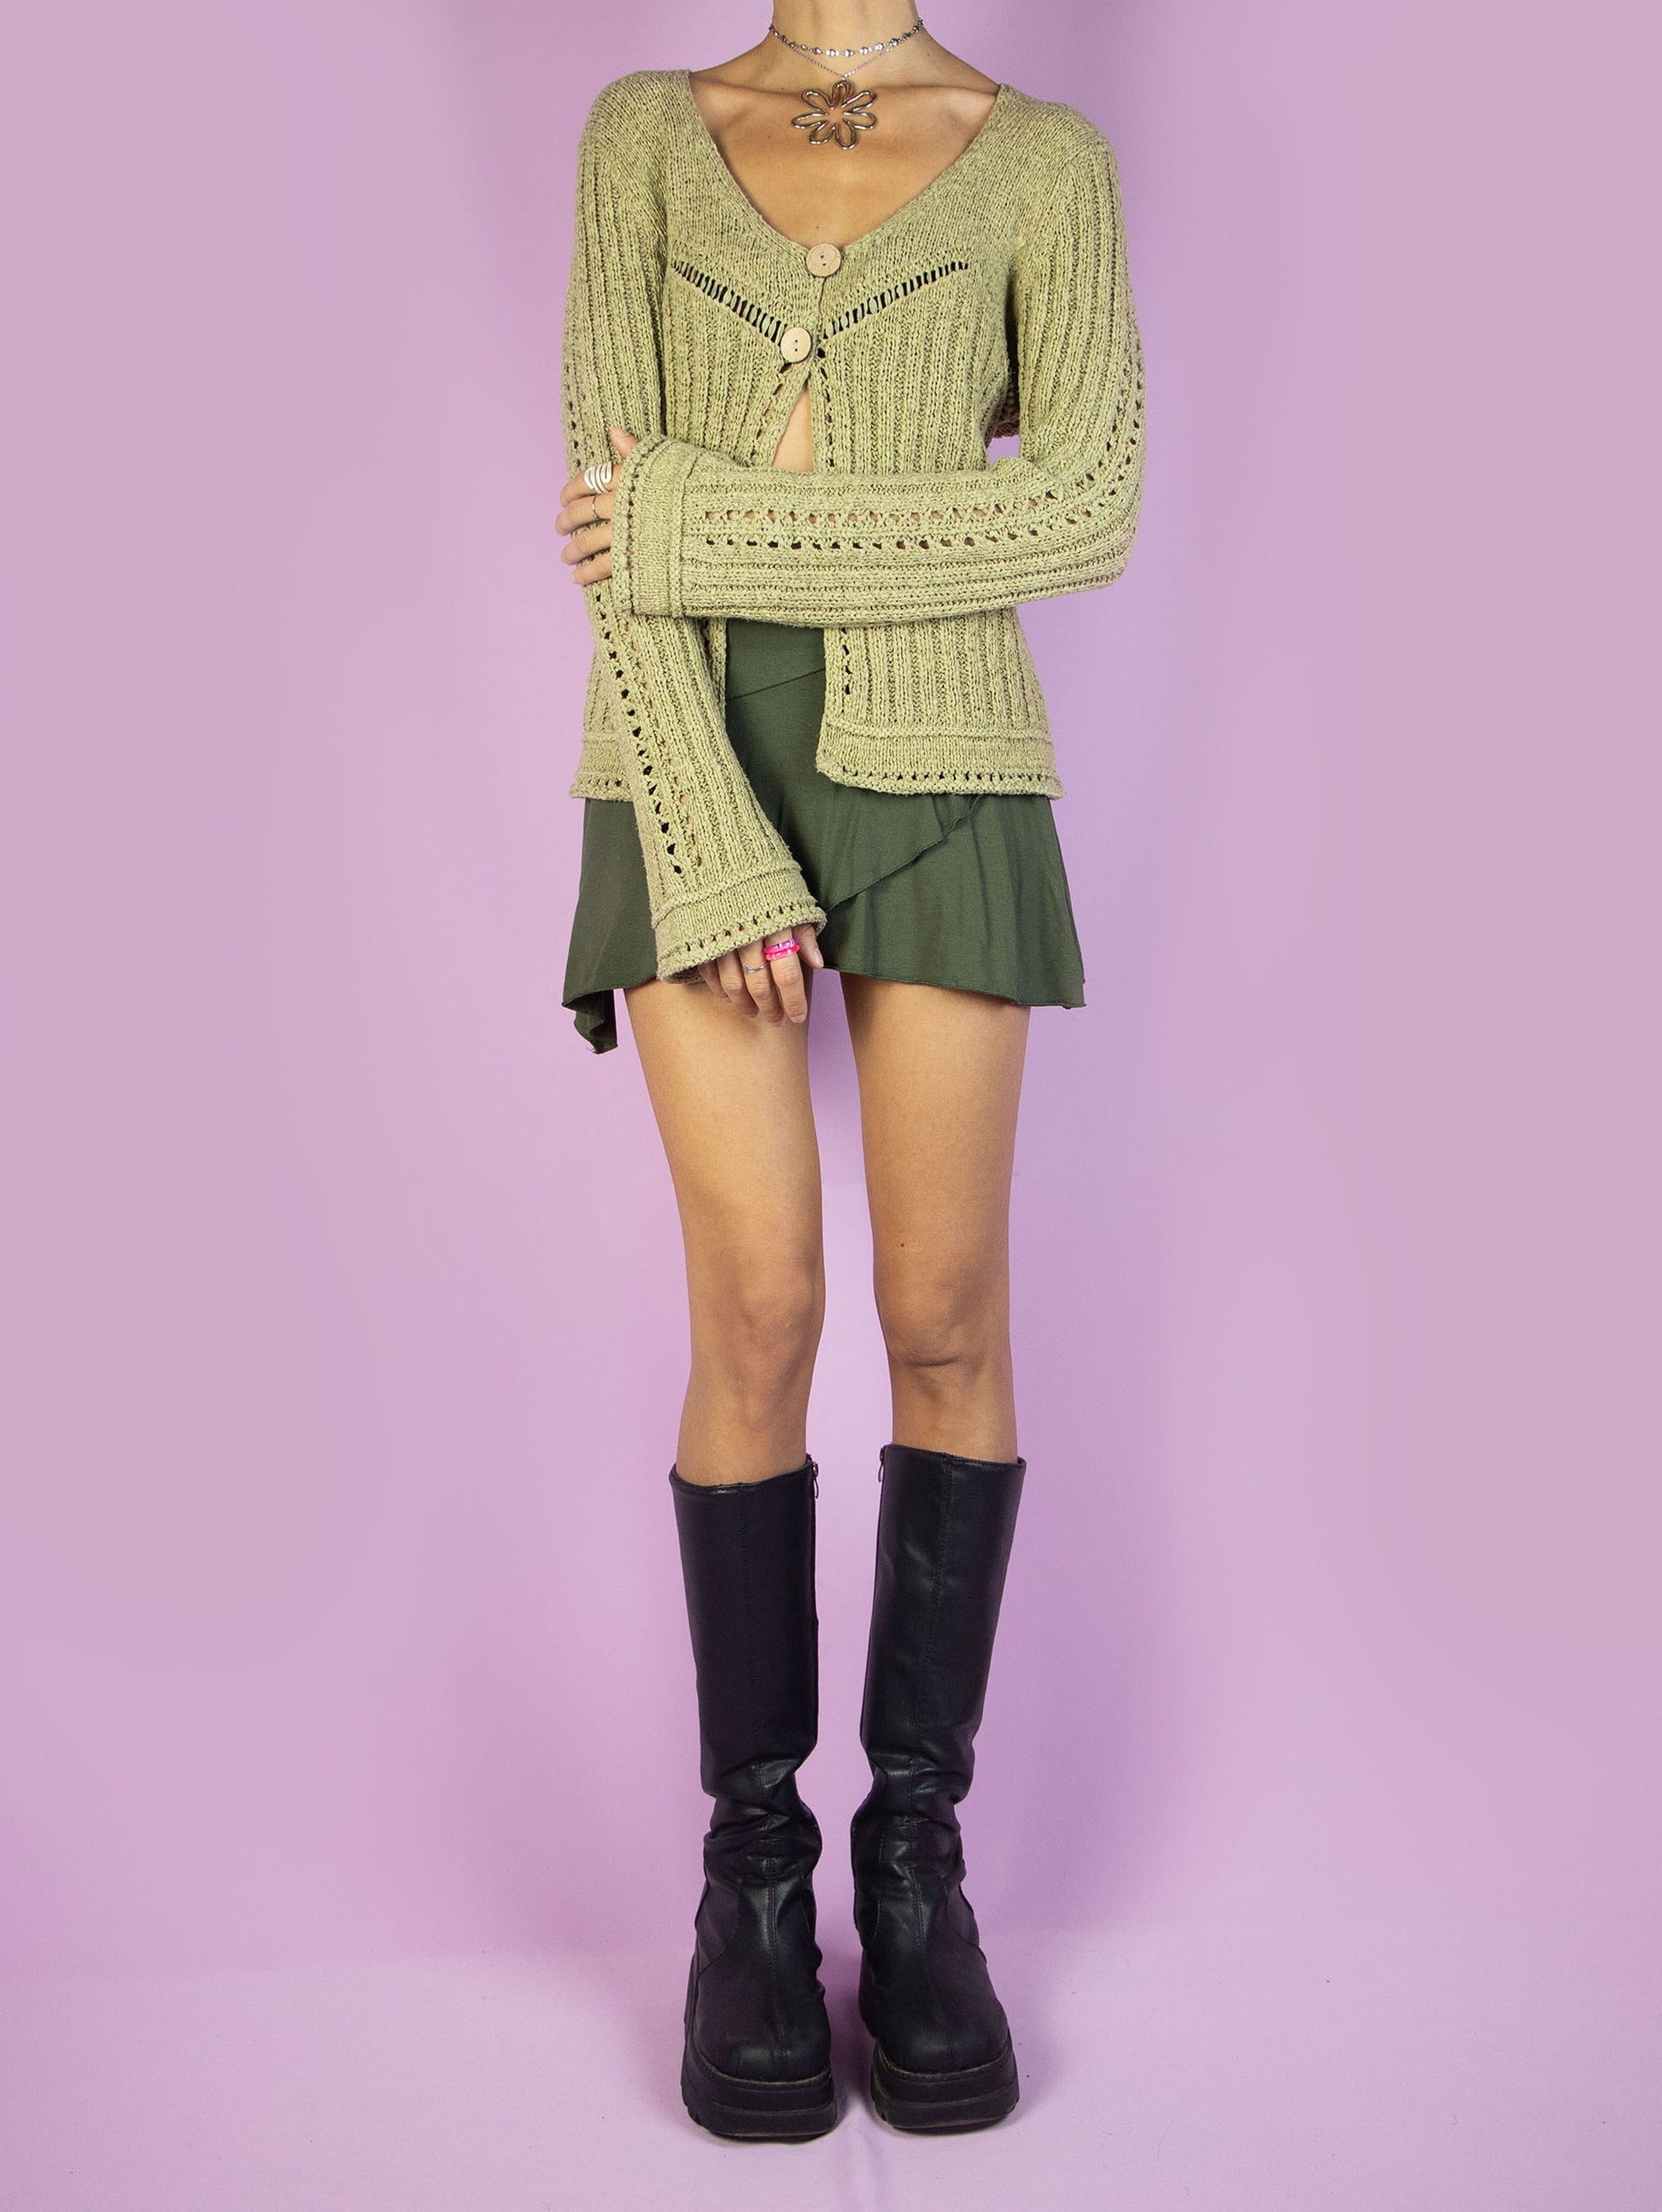 The Y2K Green Two-Button Cardigan is a vintage ribbed cardigan in green-beige with bell sleeves and a two-button closure, featuring a v-neck. Super cute boho fairy grunge 2000s knit sweater.